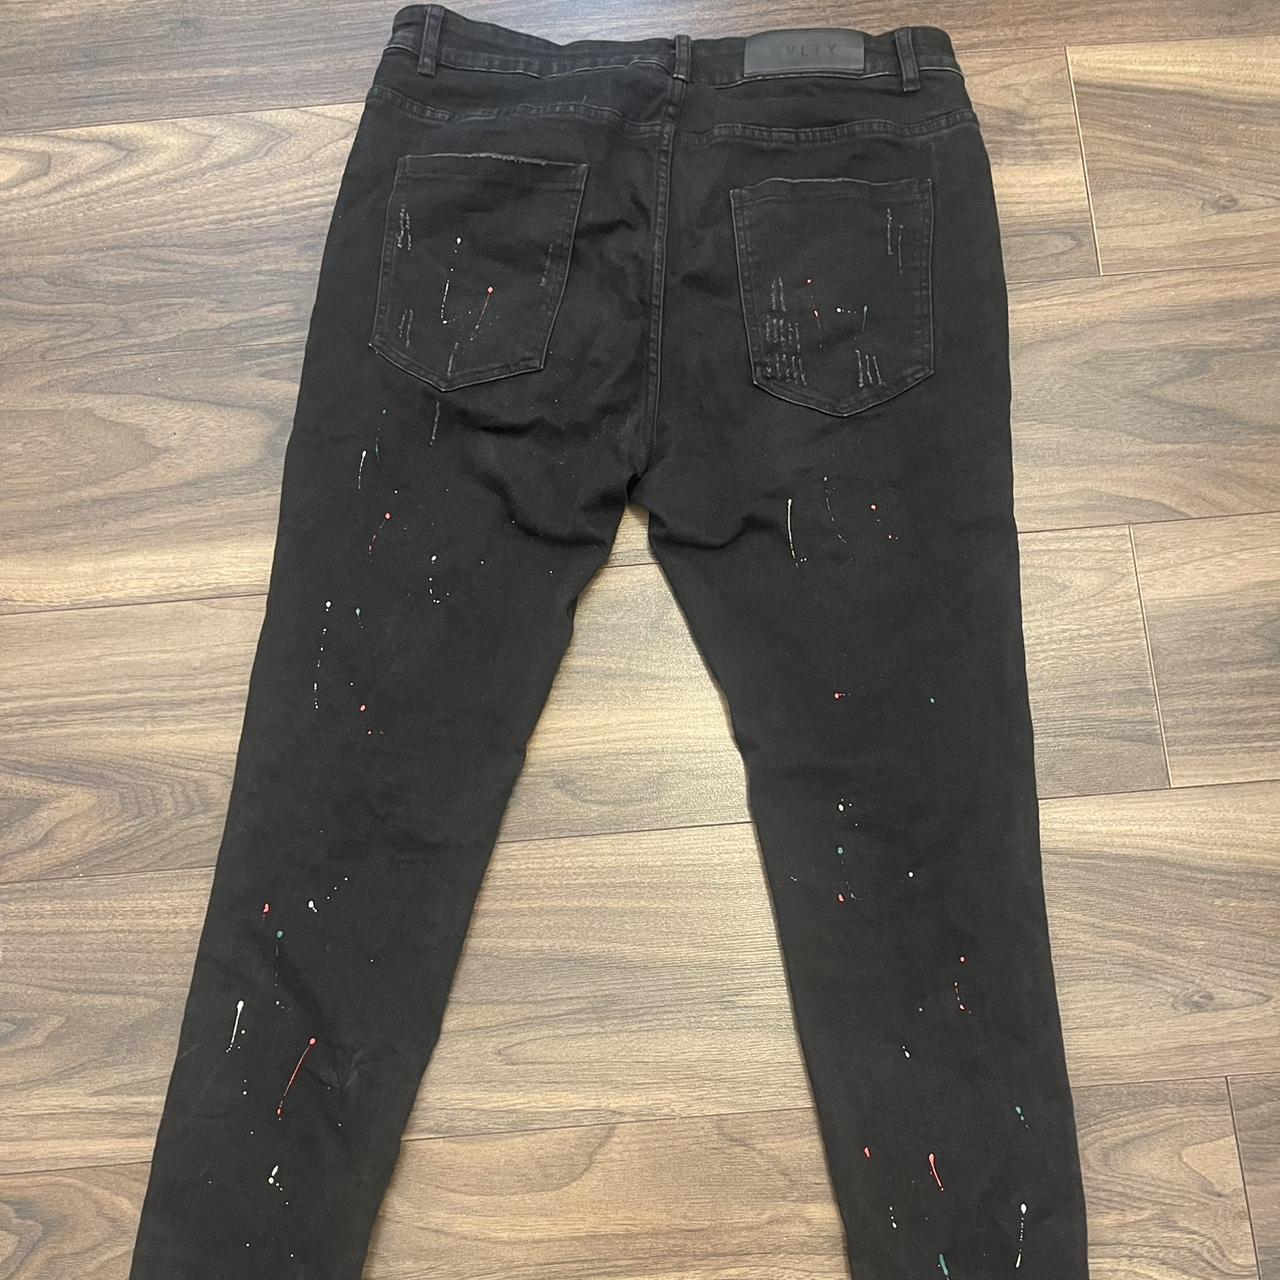 NVLTY Paint splatter ripped jeans - RRP £80 - Hardly... - Depop